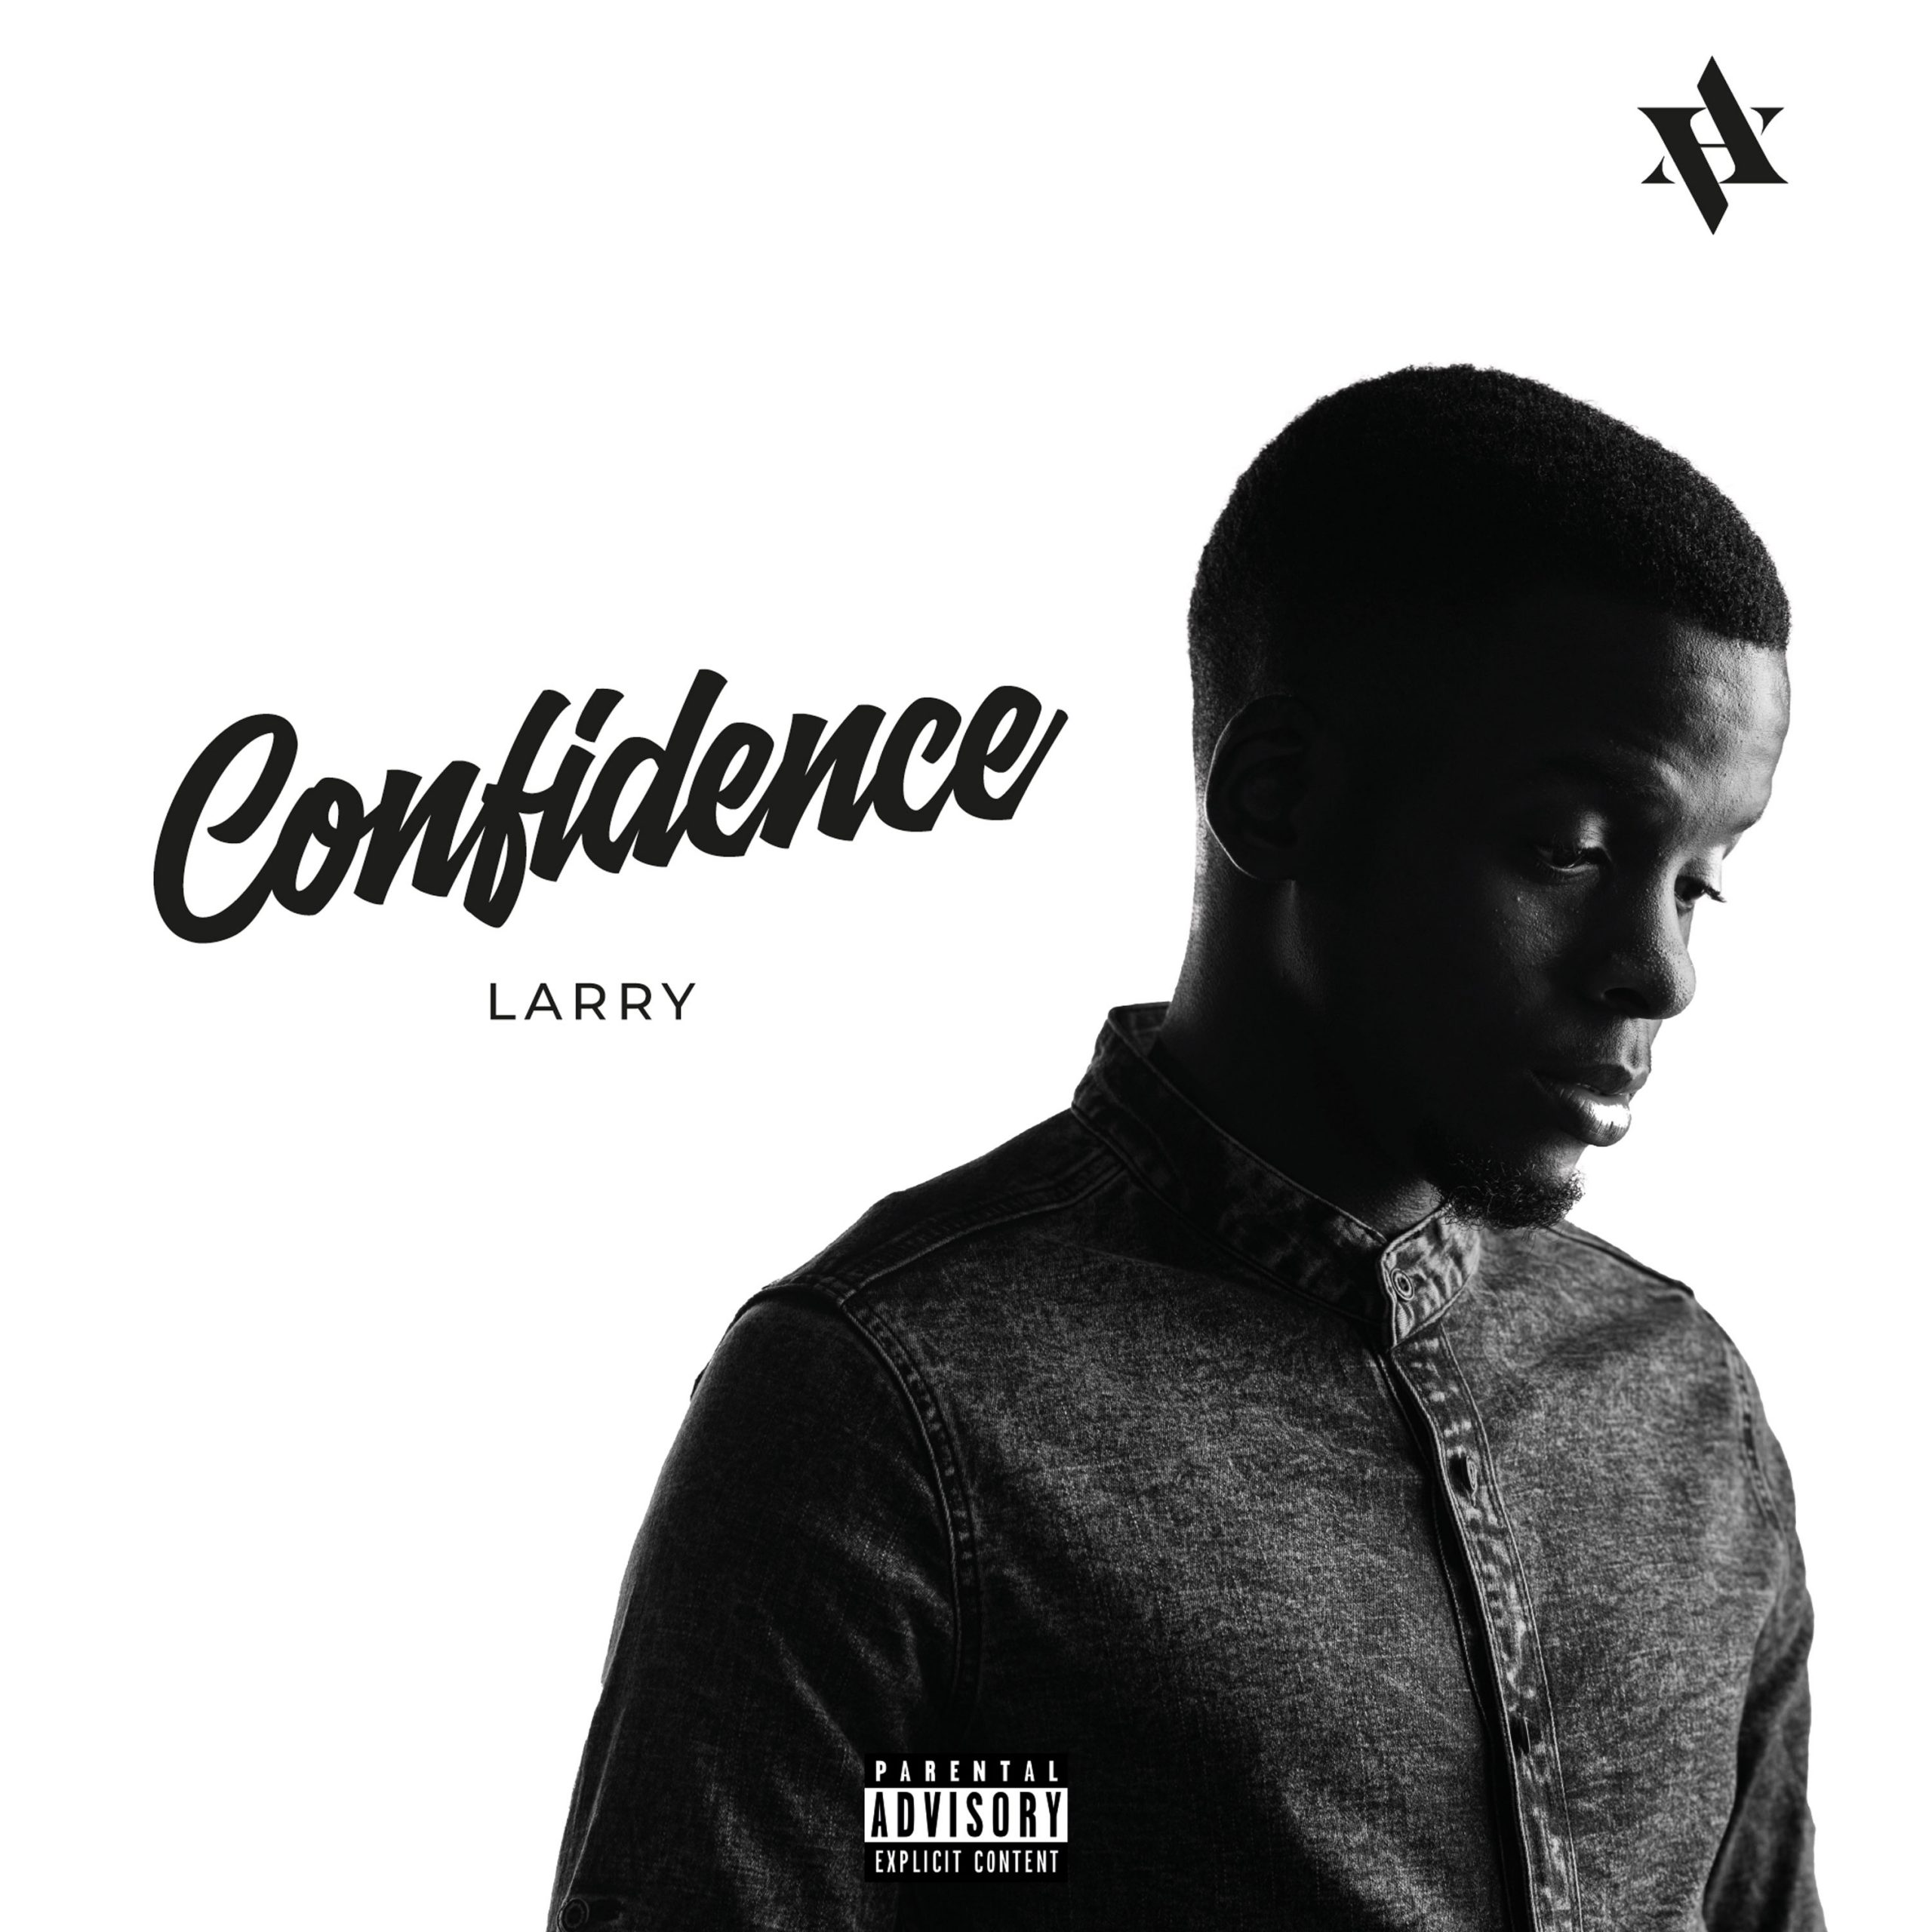 Larry talks Insecurities, High Self Esteem  and more on “Confidence”